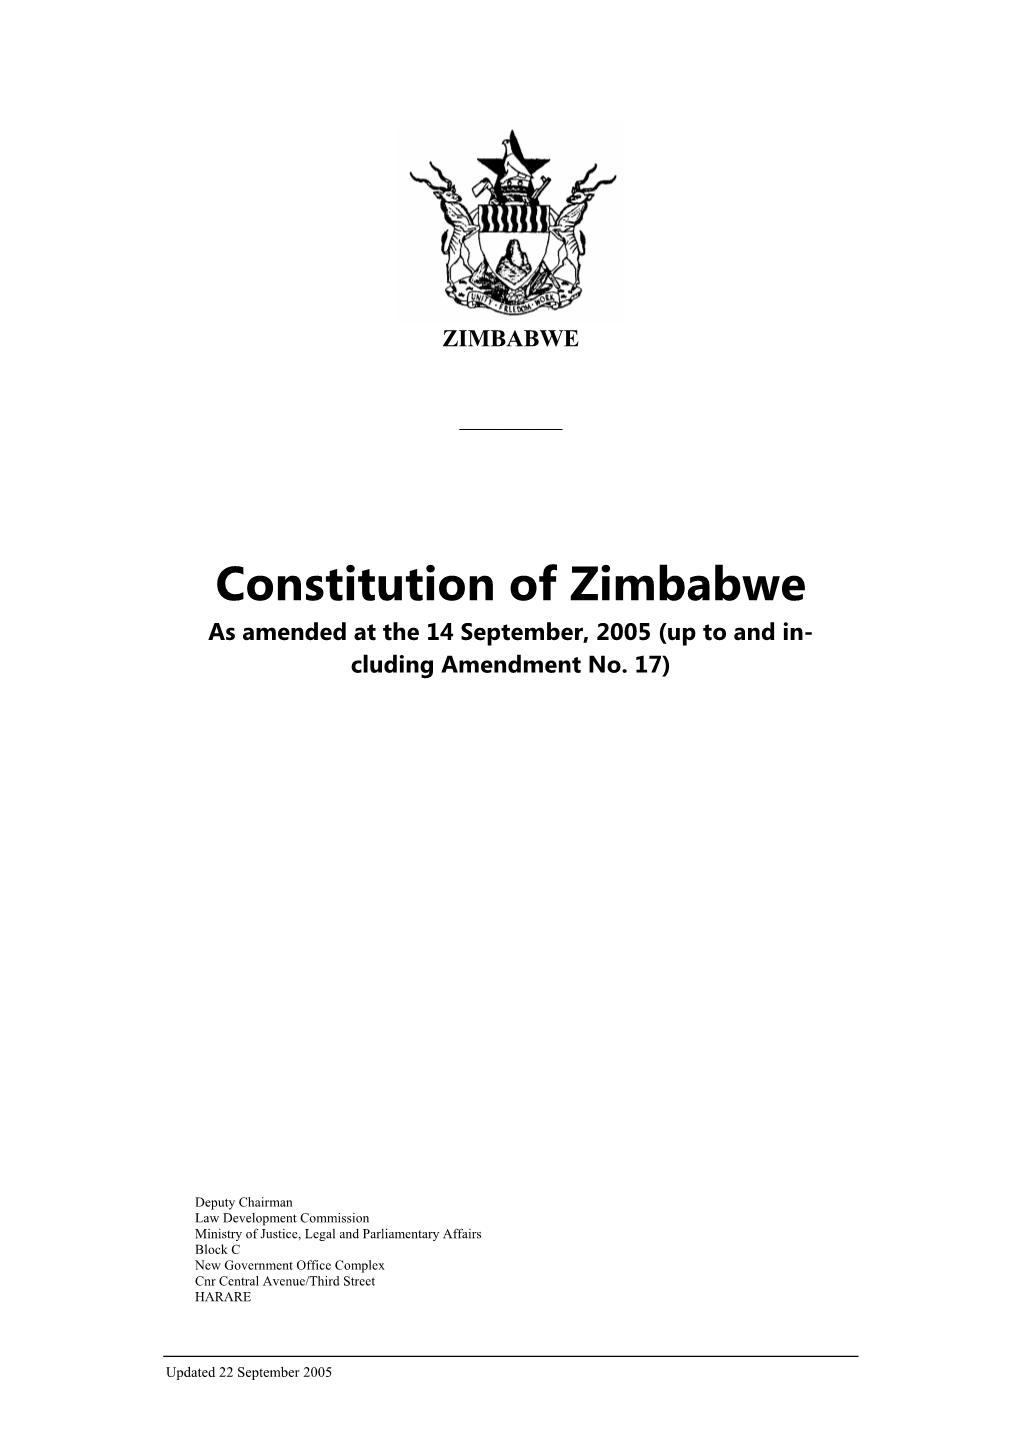 Constitution of Zimbabwe As Amended at the 14 September, 2005 (Up to and In- Cluding Amendment No